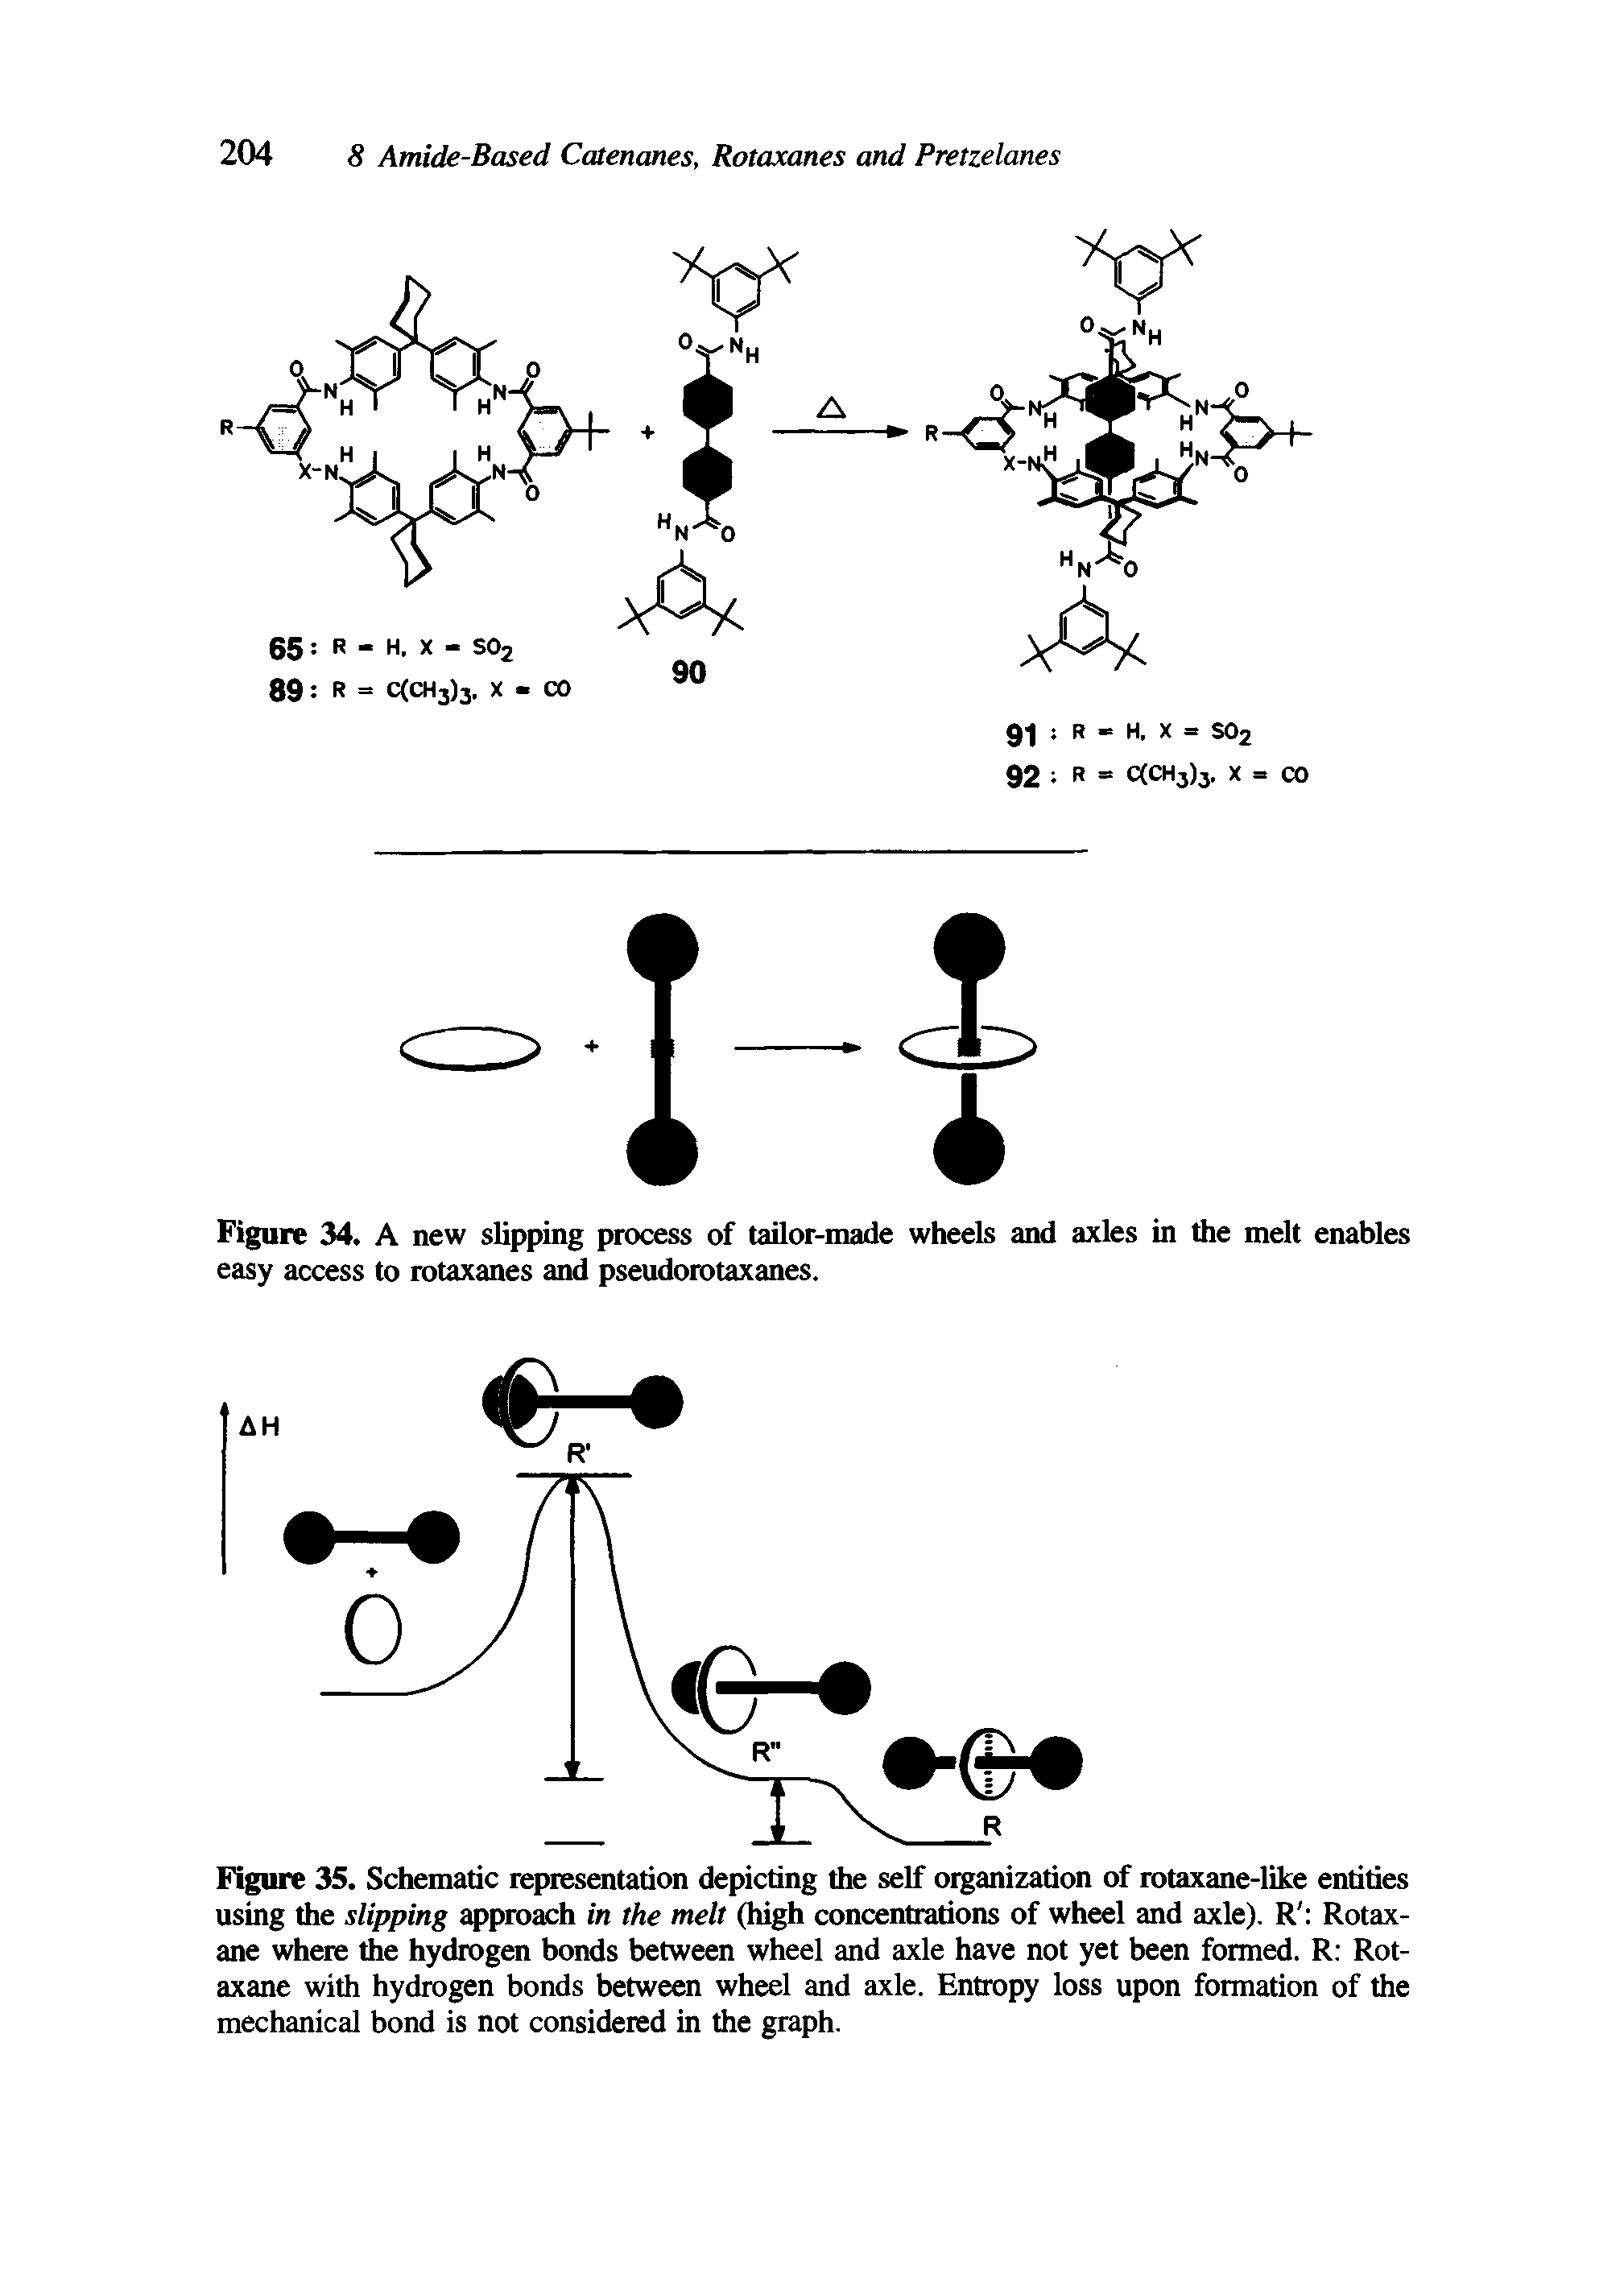 Figure 35. Schematic representation depicting the self organization of rotaxane-like entities using the slipping approach in the melt (high concentrations of wheel and axle). R Rotax-ane where the hydrogen bonds between wheel and axle have not yet been formed. R Rot-axane with hydrogen bonds between wheel and axle. Entropy loss upon formation of the mechanical bond is not considered in the graph.